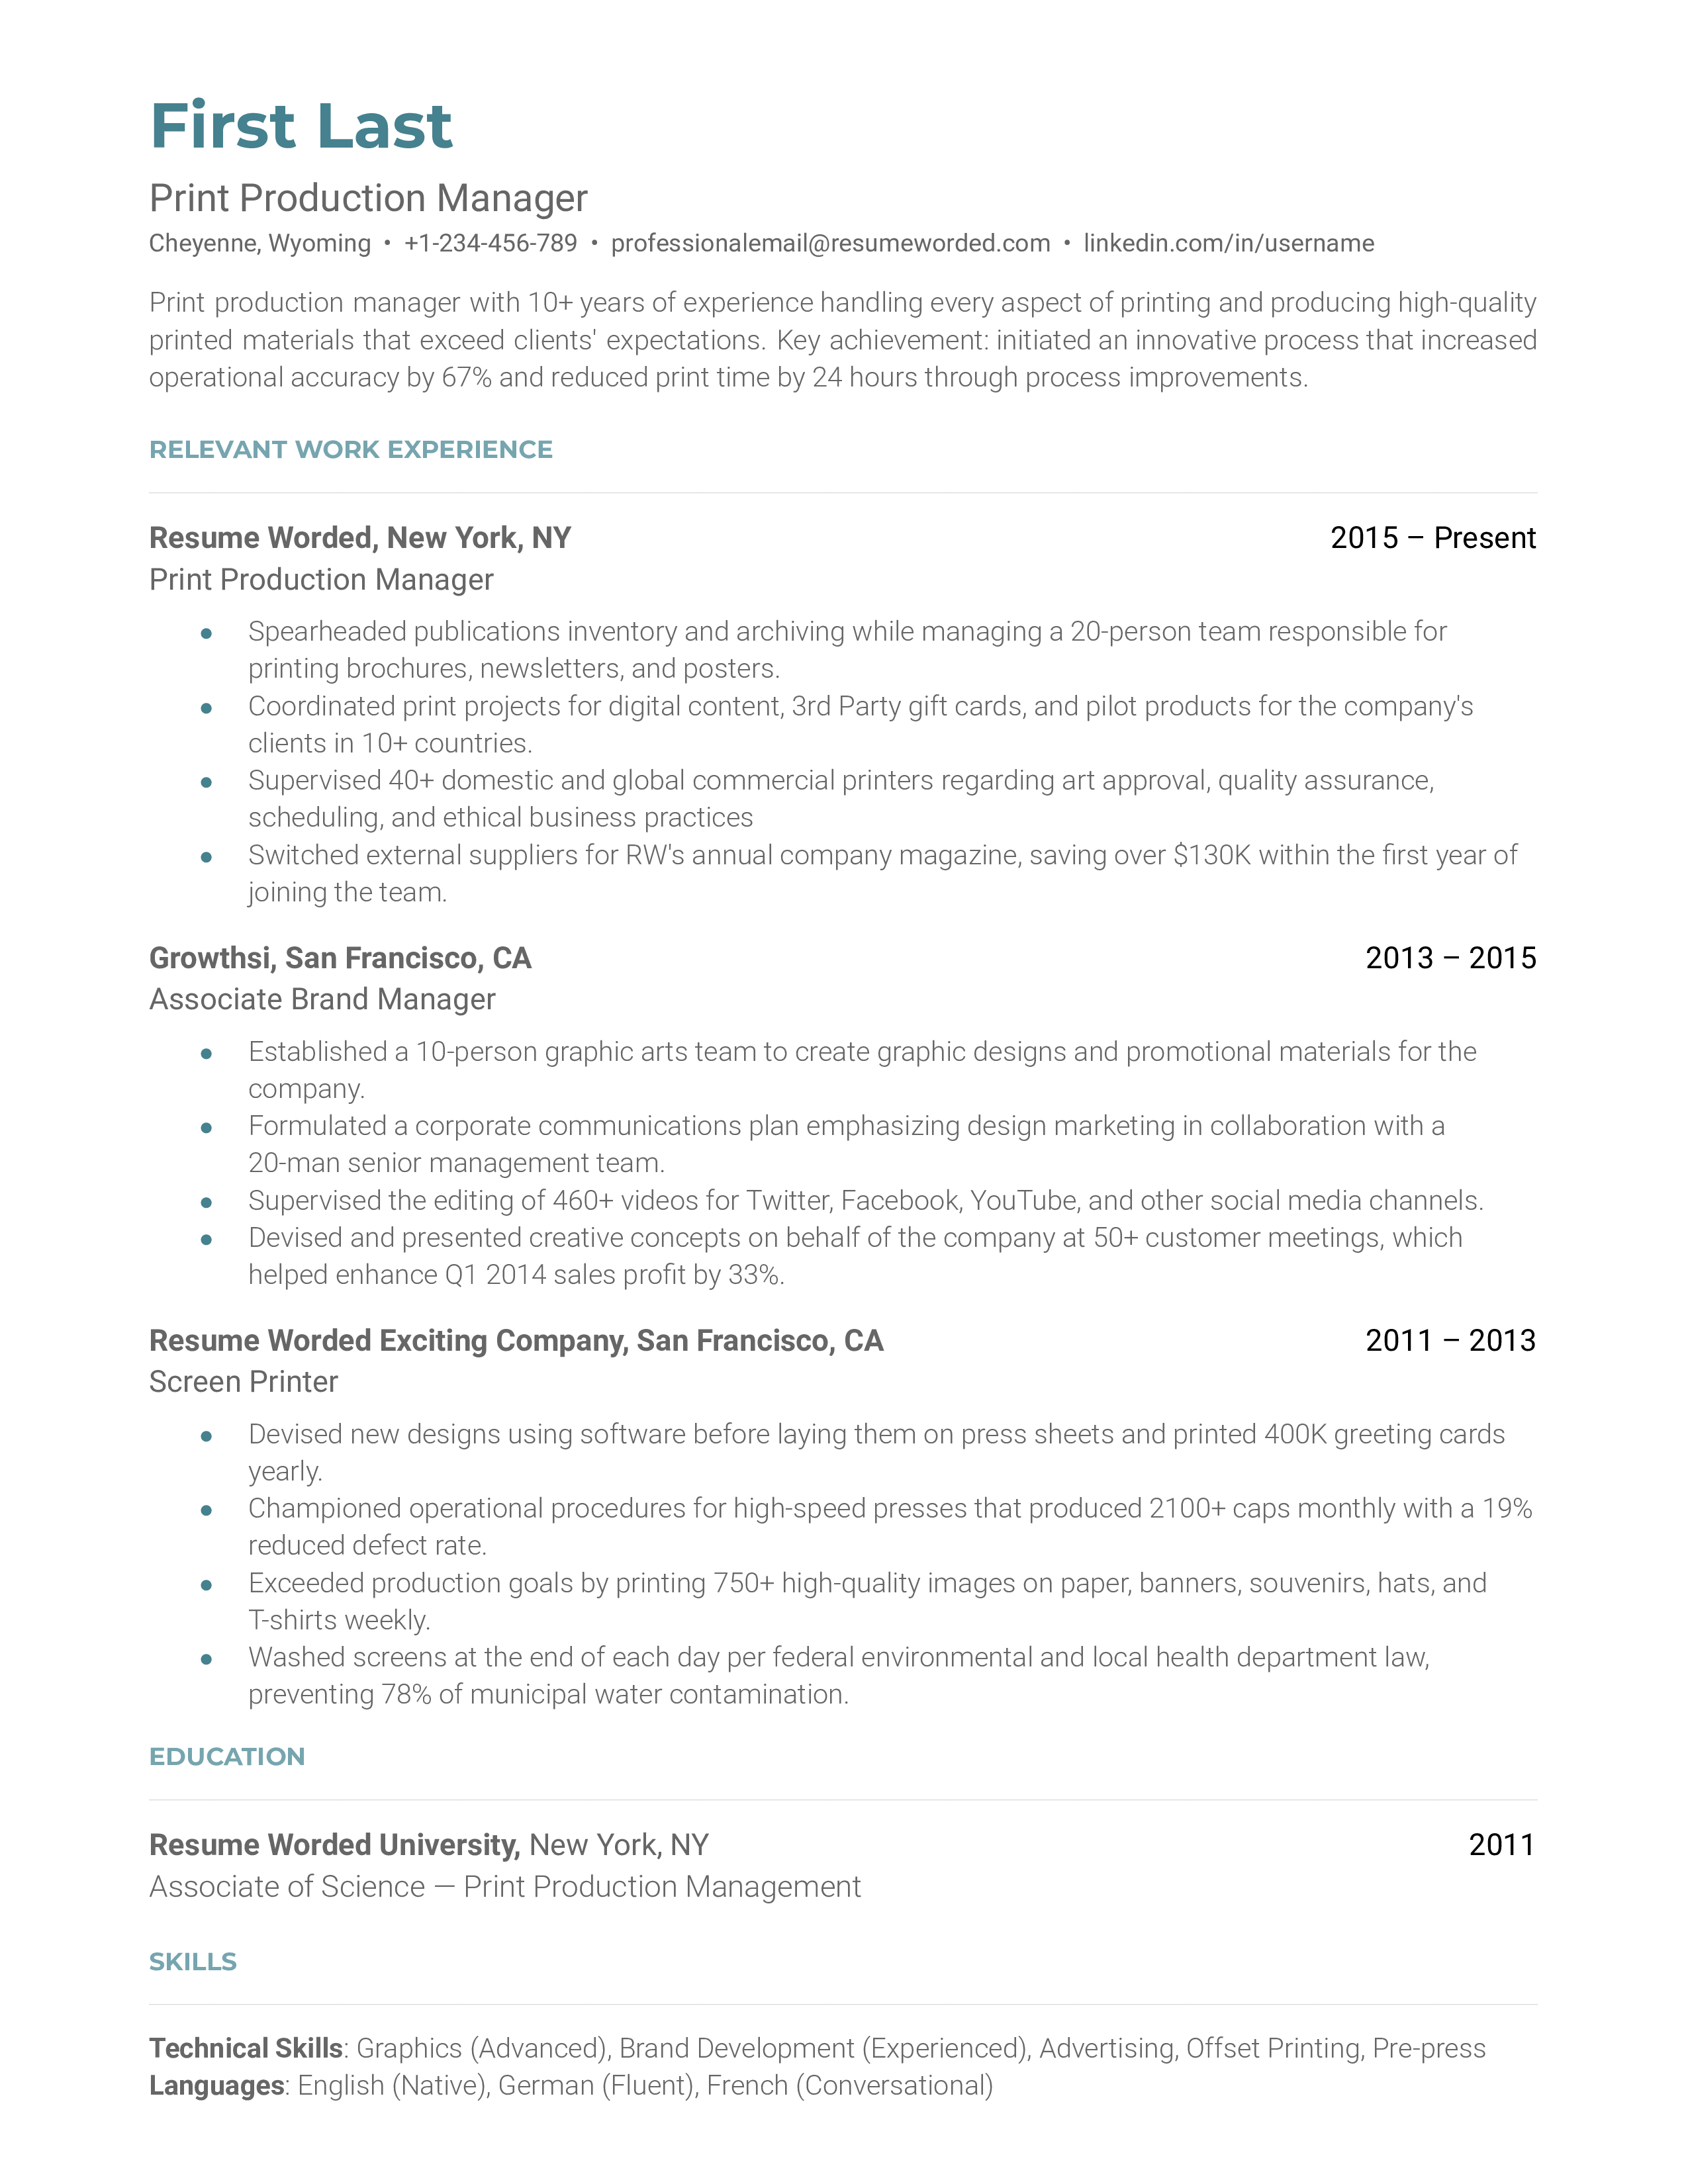 A screenshot of a CV for a Print Production Manager role.